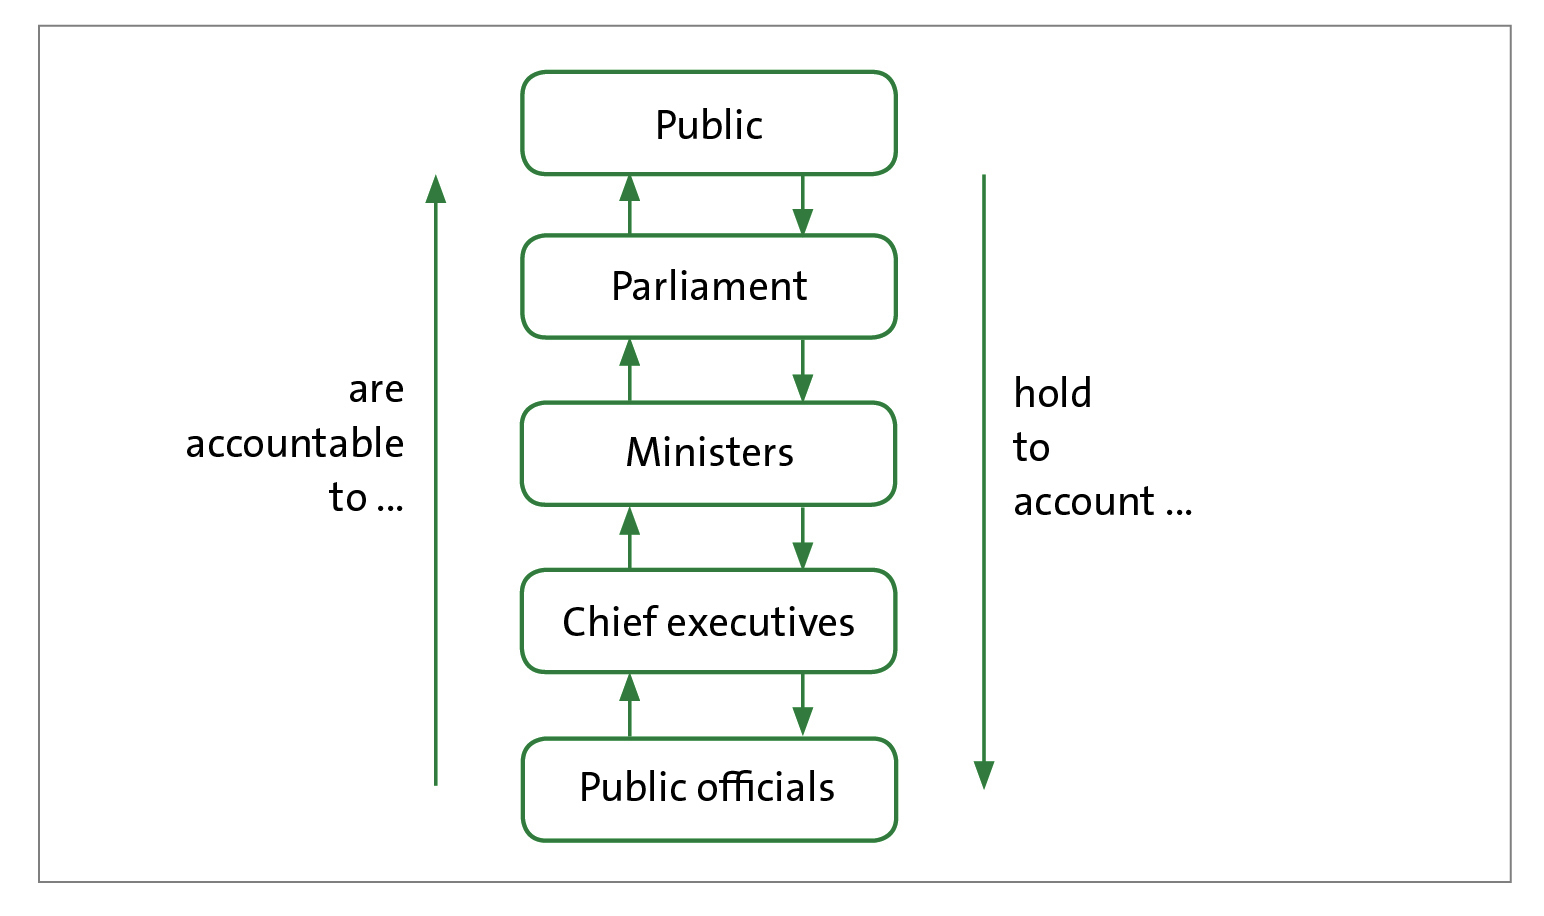 Figure 1 - The Westminster chain of public accountability